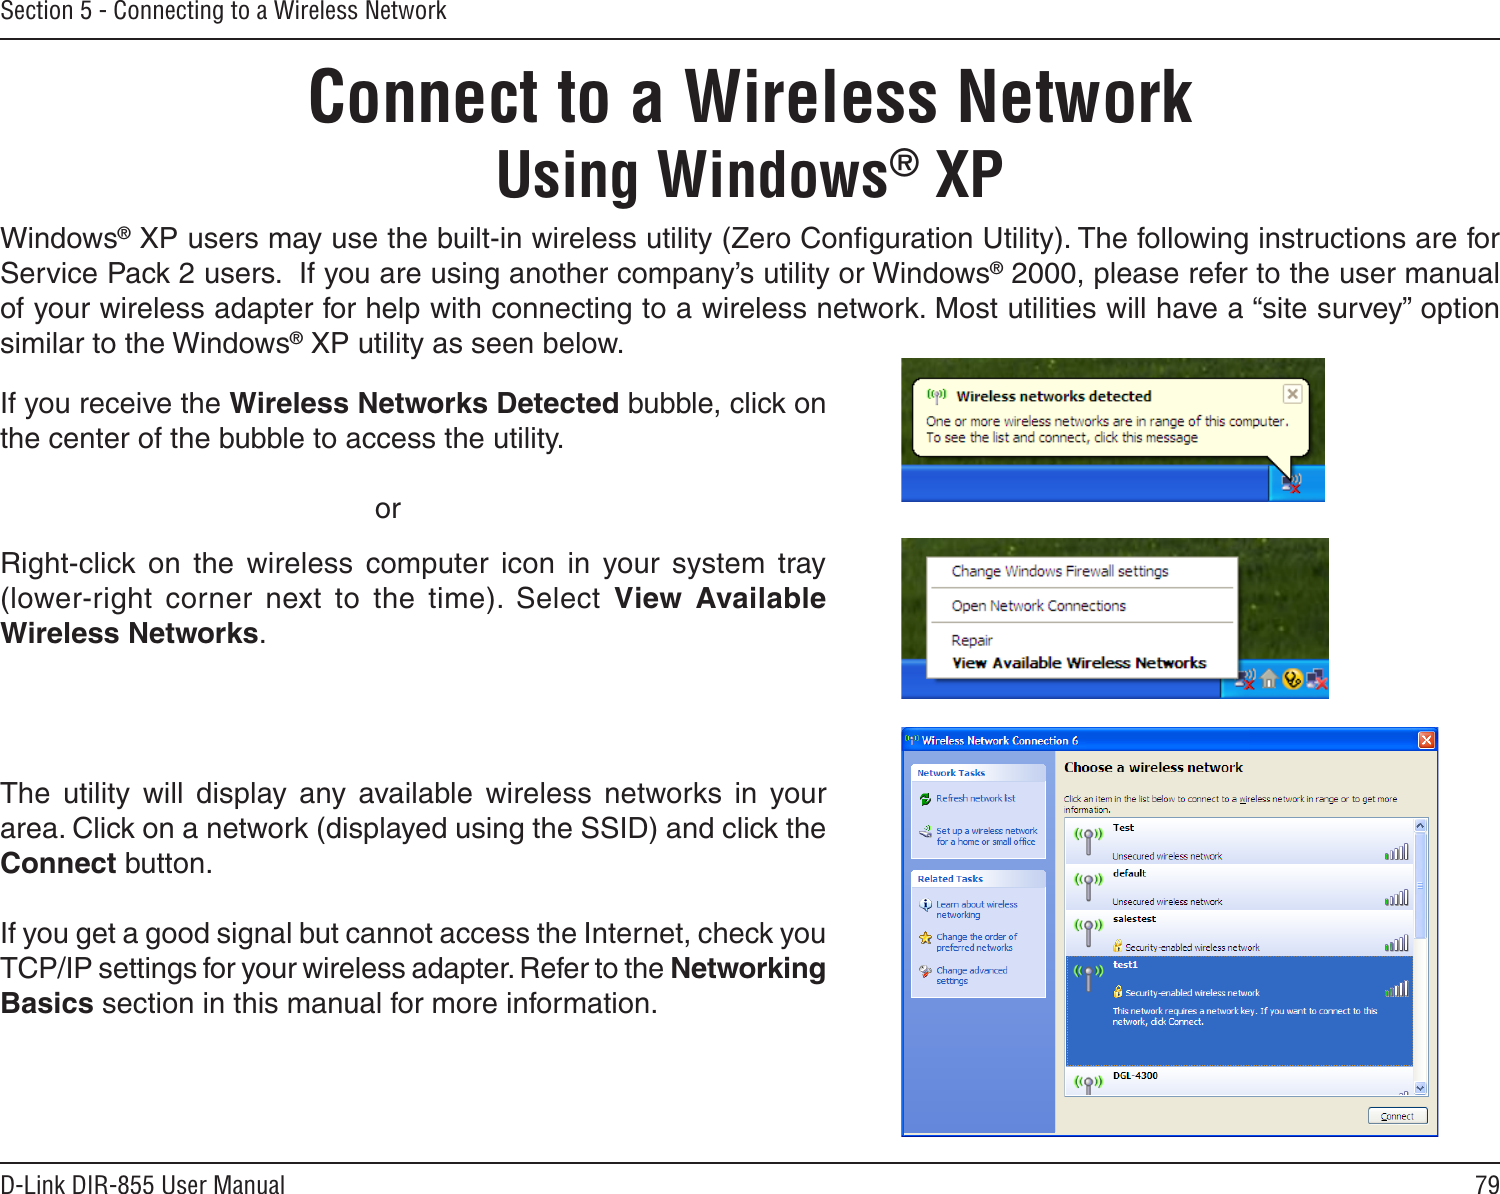 79D-Link DIR-855 User ManualSection 5 - Connecting to a Wireless NetworkConnect to a Wireless NetworkUsing Windows® XPWindows® XP users may use the built-in wireless utility (Zero Conﬁguration Utility). The following instructions are for Service Pack 2 users.  If you are using another company’s utility or Windows® 2000, please refer to the user manual of your wireless adapter for help with connecting to a wireless network. Most utilities will have a “site survey” option similar to the Windows® XP utility as seen below.Right-click  on  the  wireless  computer  icon  in  your  system  tray (lower-right  corner  next  to  the  time).  Select  View  Available Wireless Networks.If you receive the Wireless Networks Detected bubble, click on the center of the bubble to access the utility.     orThe  utility  will  display  any  available  wireless  networks  in  your area. Click on a network (displayed using the SSID) and click the Connect button.If you get a good signal but cannot access the Internet, check you TCP/IP settings for your wireless adapter. Refer to the Networking Basics section in this manual for more information.